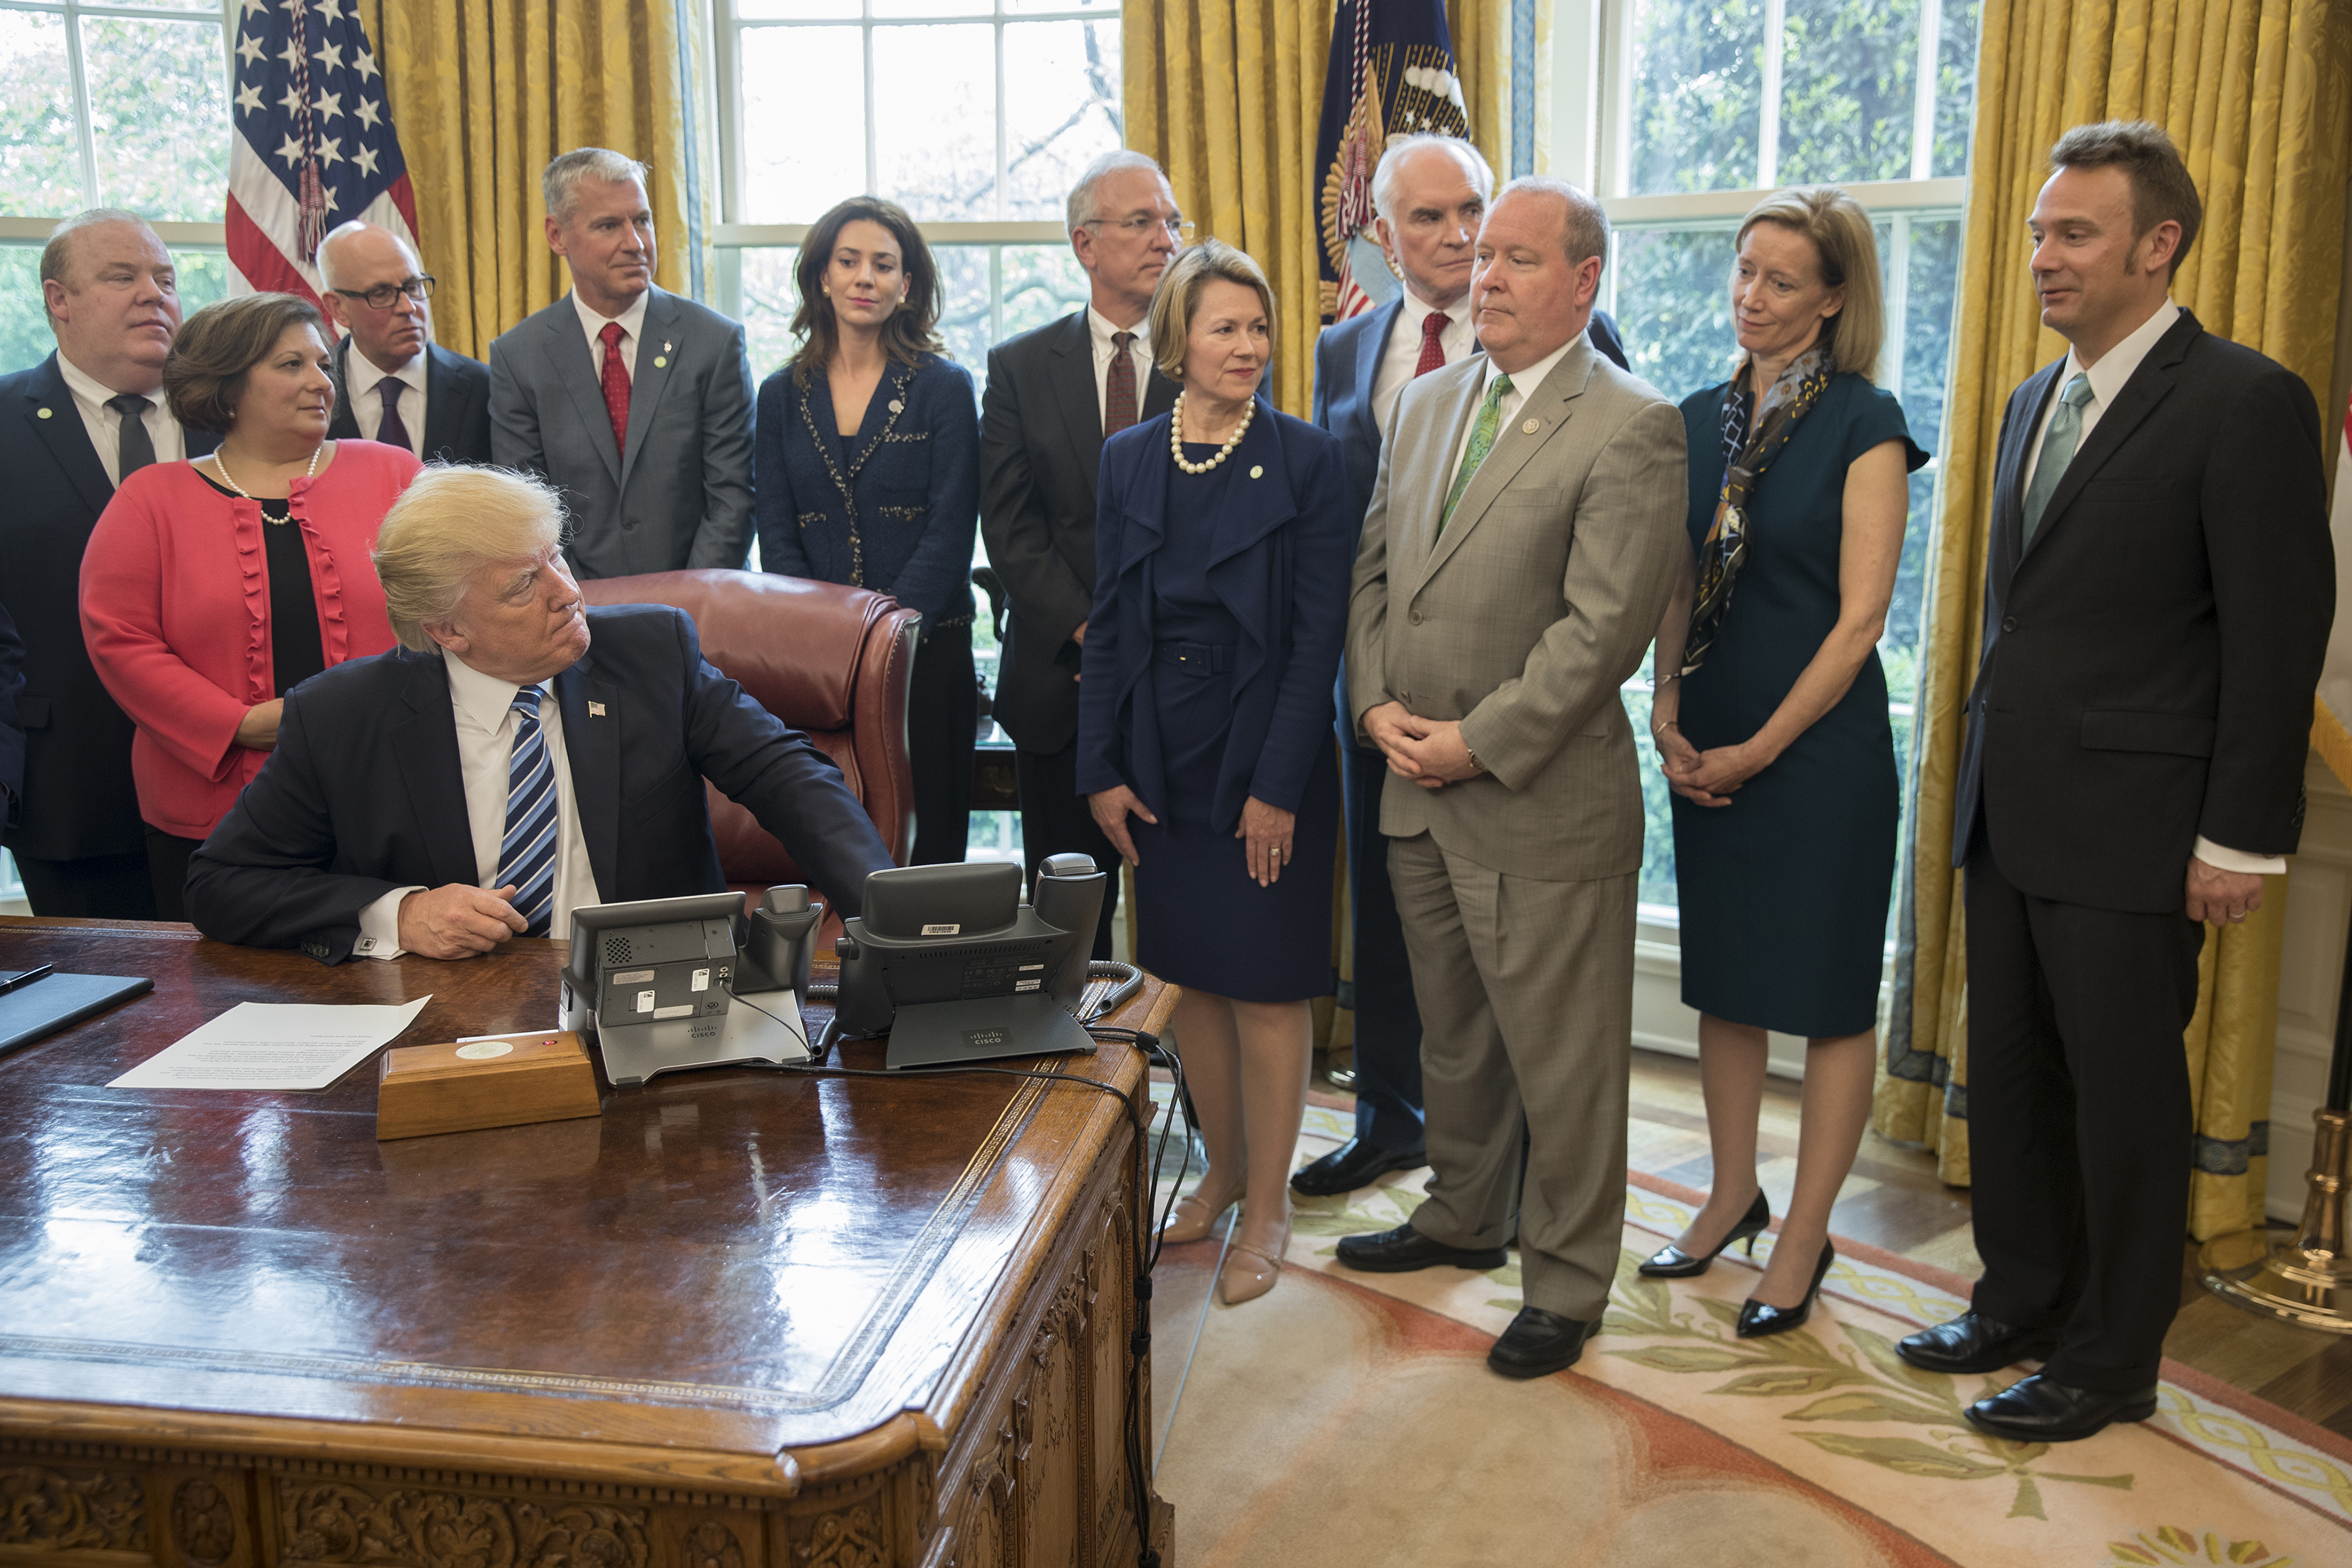 President Donald Trump, flanked by members of Congress, and officials from the aluminum industry, signs a memorandum on aluminum imports and threats to national security, in Washington, April 27, 2017. The Trump administration blames China for the decline of aluminum production in the U.S., but some of America's largest aluminum companies, including Alcoa, operate in Iceland. At the right is Roy Harvey, chief executive officer of Alcoa Corporation. (Stephen Crowley/The New York Times)